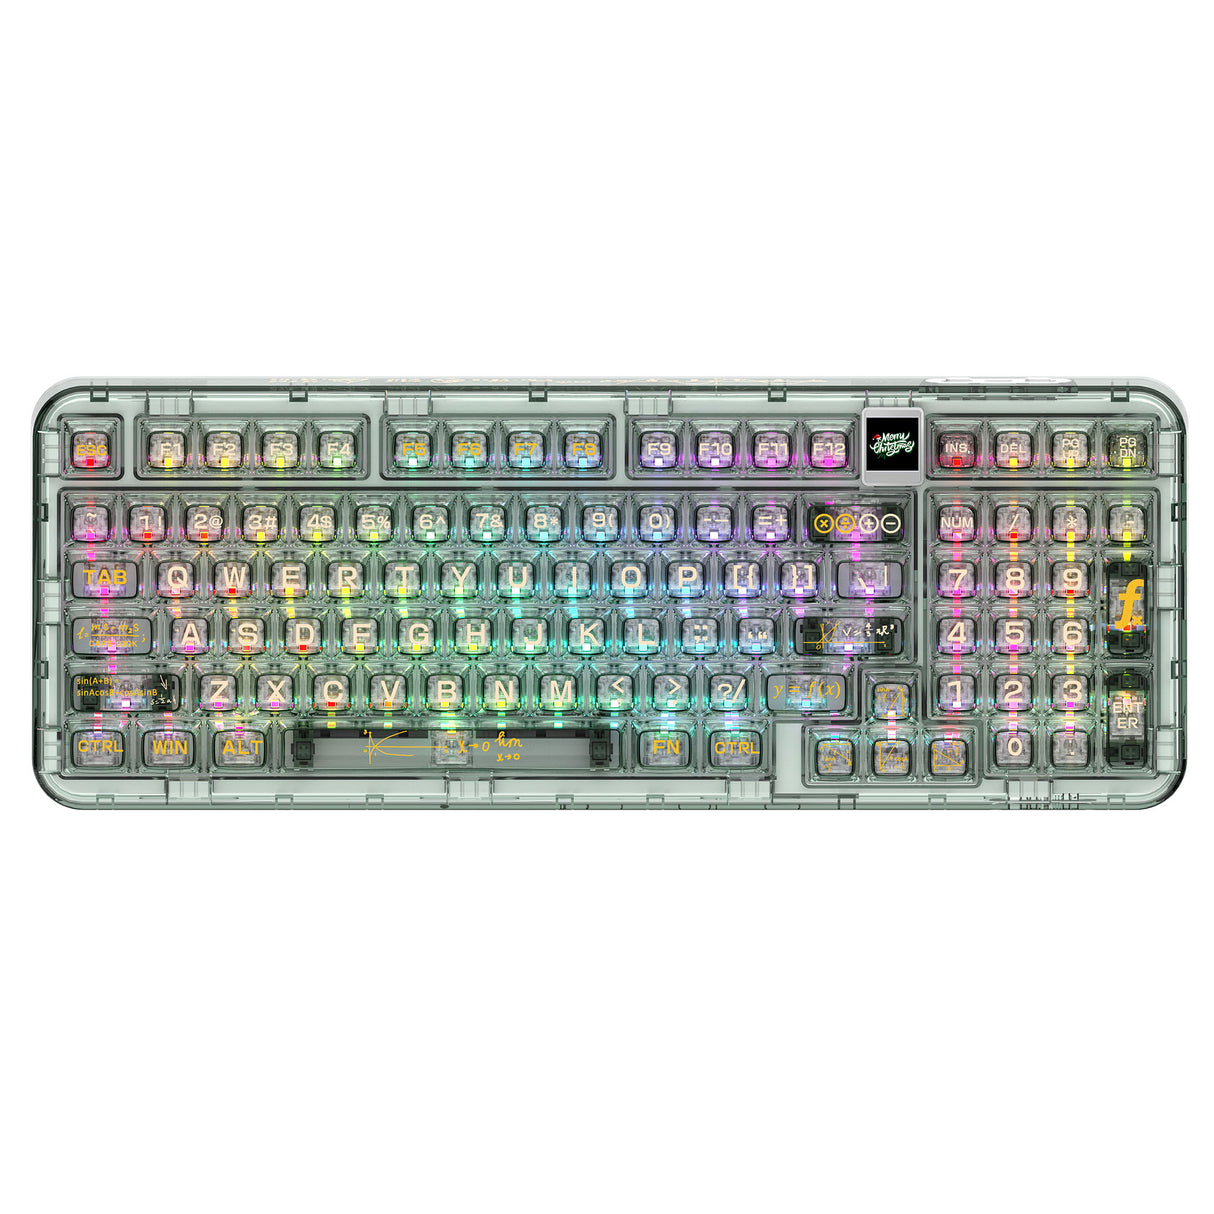 YUNZII Coolkiller CK98 Wireless Hot Swappable OLED Mechanical Keyboard-Math